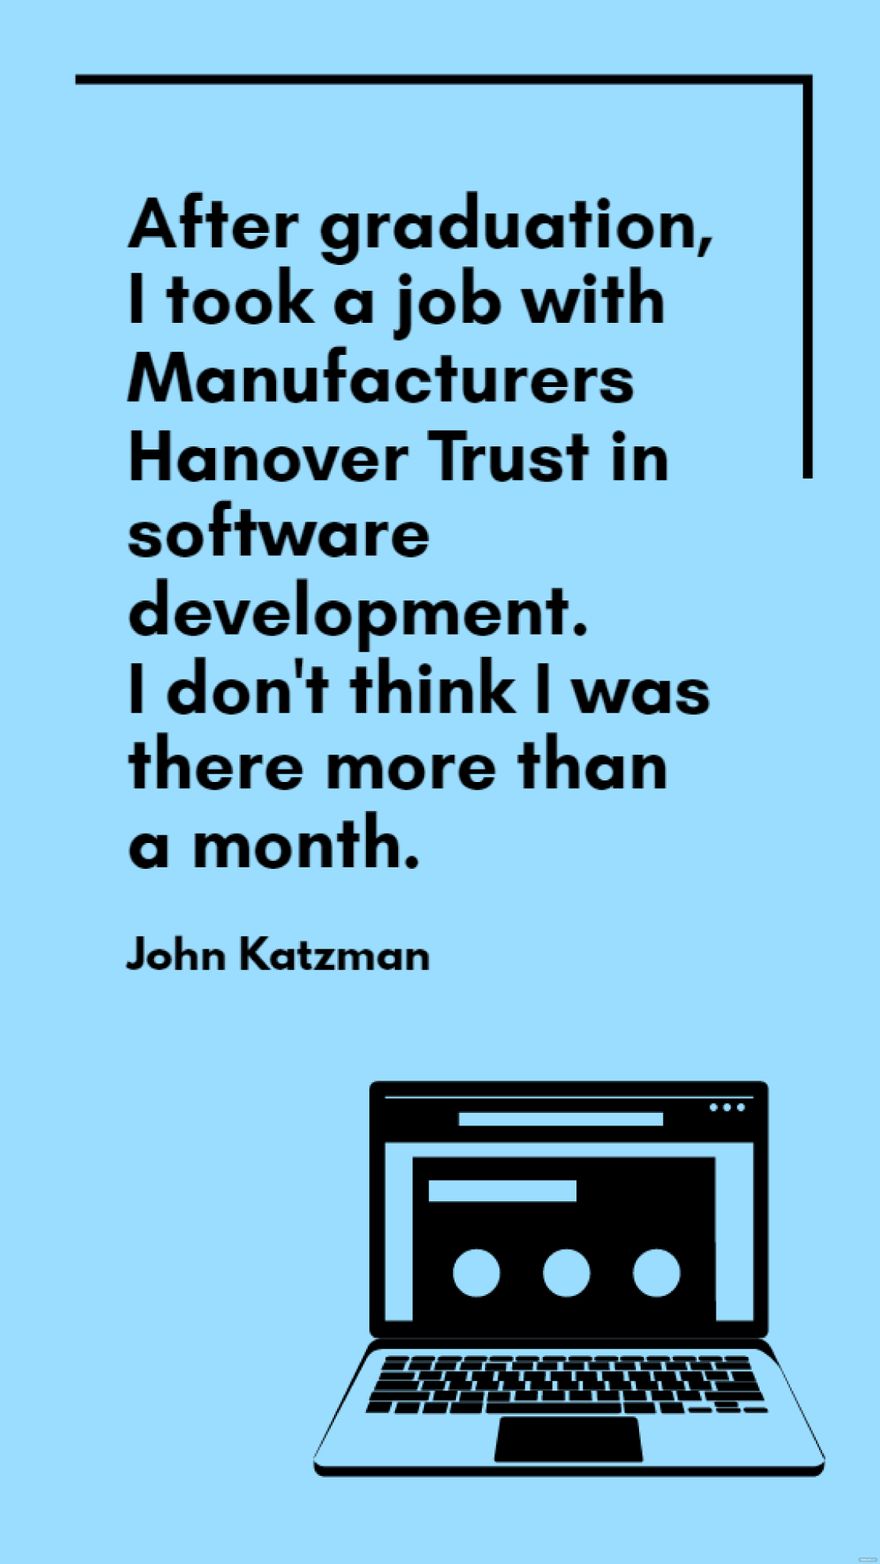 John Katzman - After graduation, I took a job with Manufacturers Hanover Trust in software development. I don't think I was there more than a month. in JPG